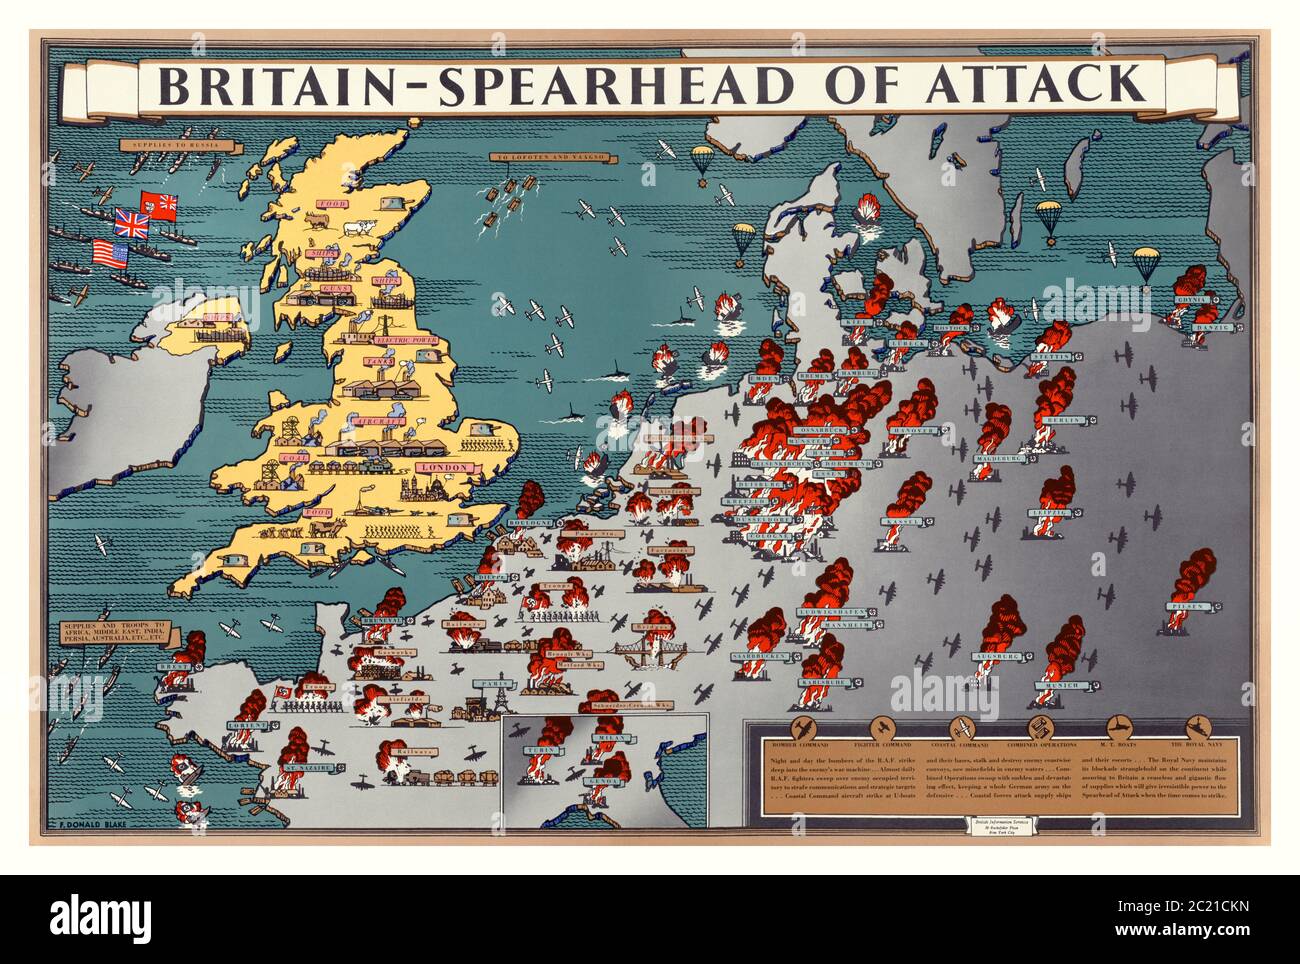 “Britain Spearhead of Attack'  WW2 1940’s Vintage Donald Blake  Illustration Map  'Britain Spearhead of Attack' Propaganda Poster of the Office of War Information. Illustration of allied air sea and land military offensives against Nazi Germany and occupied countries.  Date 1943–1945 World War II Second World War by Scottish artist Donald Blake, Stock Photo